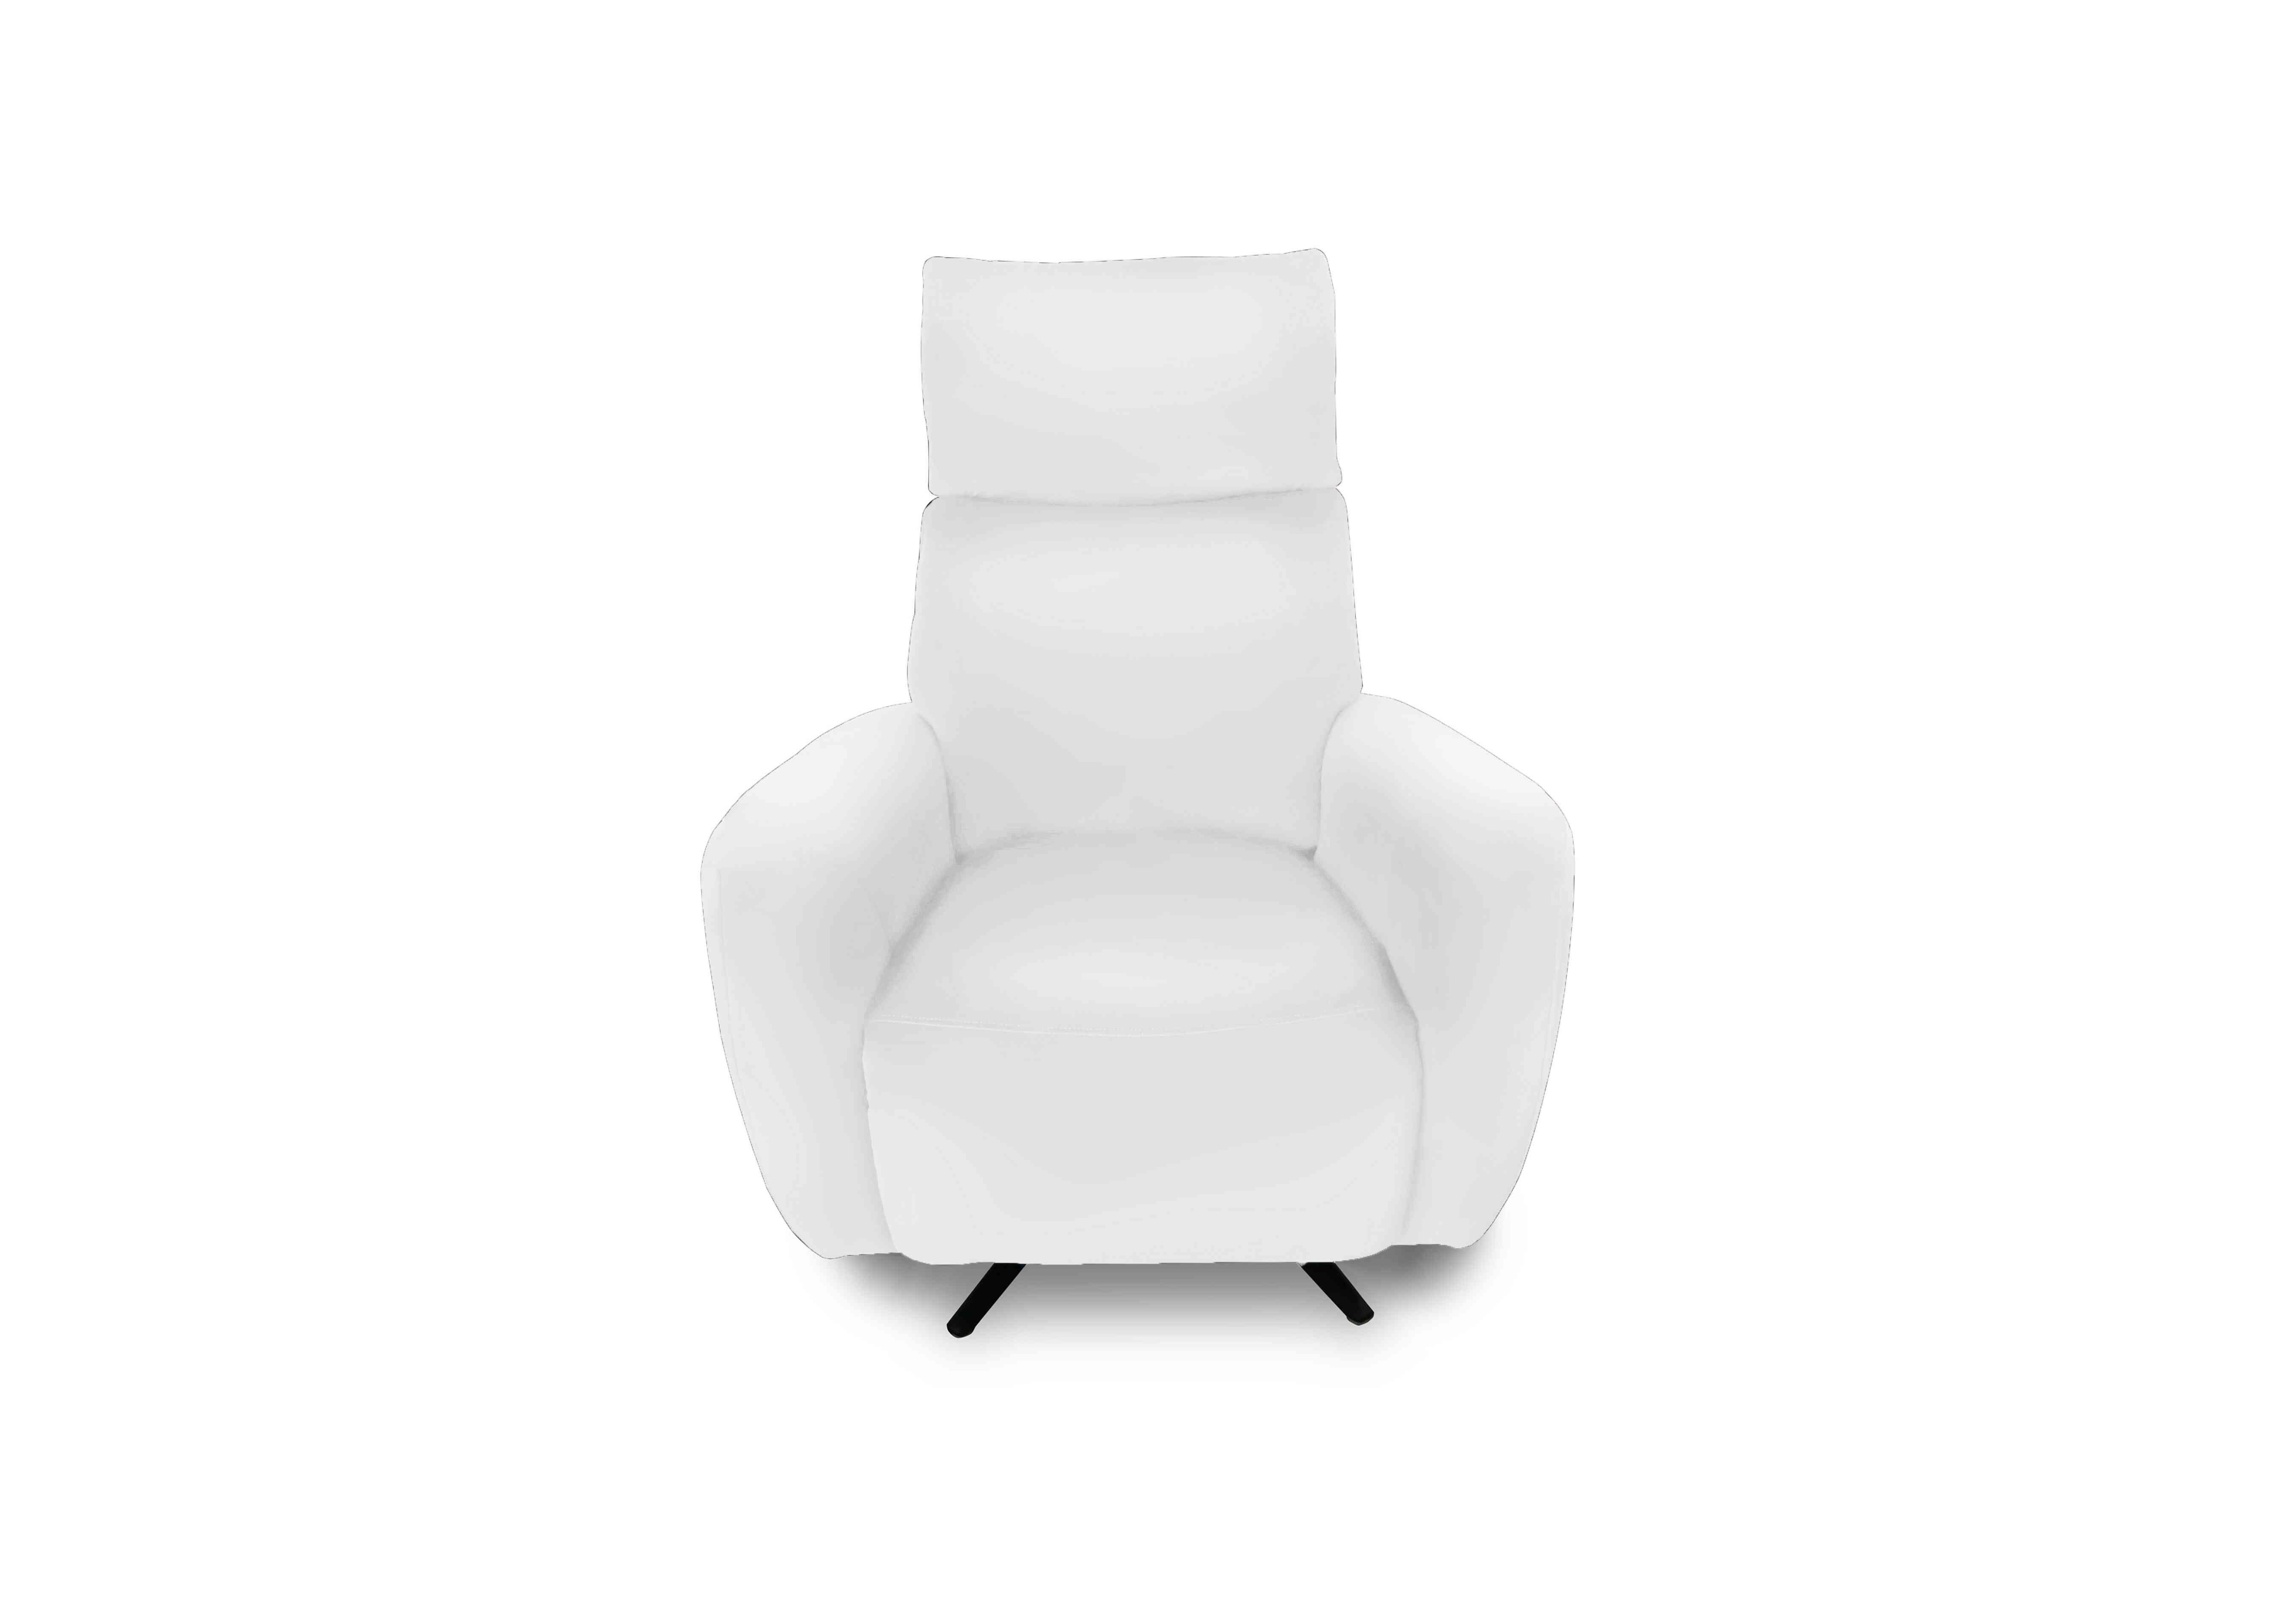 Designer Chair Collection Granada Leather Power Recliner Swivel Chair with Massage Feature in Bv-744d Star White on Furniture Village